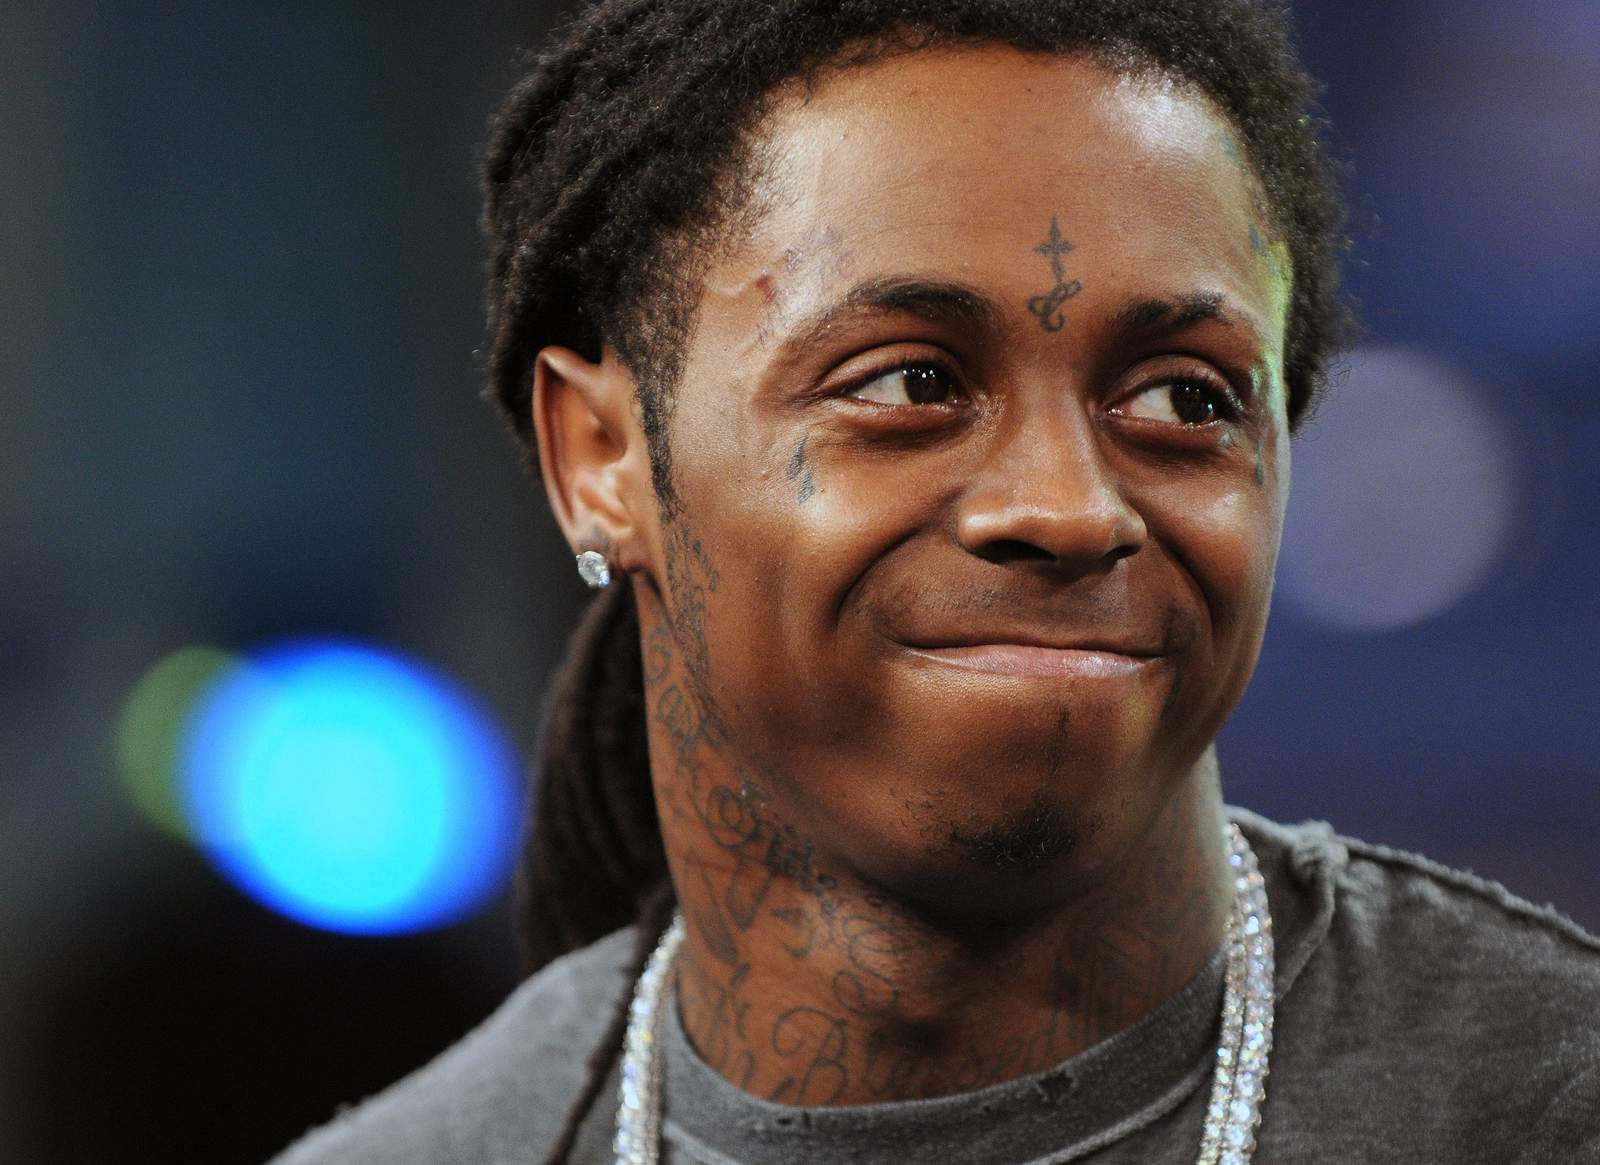 Rapper Lil Wayne pleads guilty to federal weapons charge